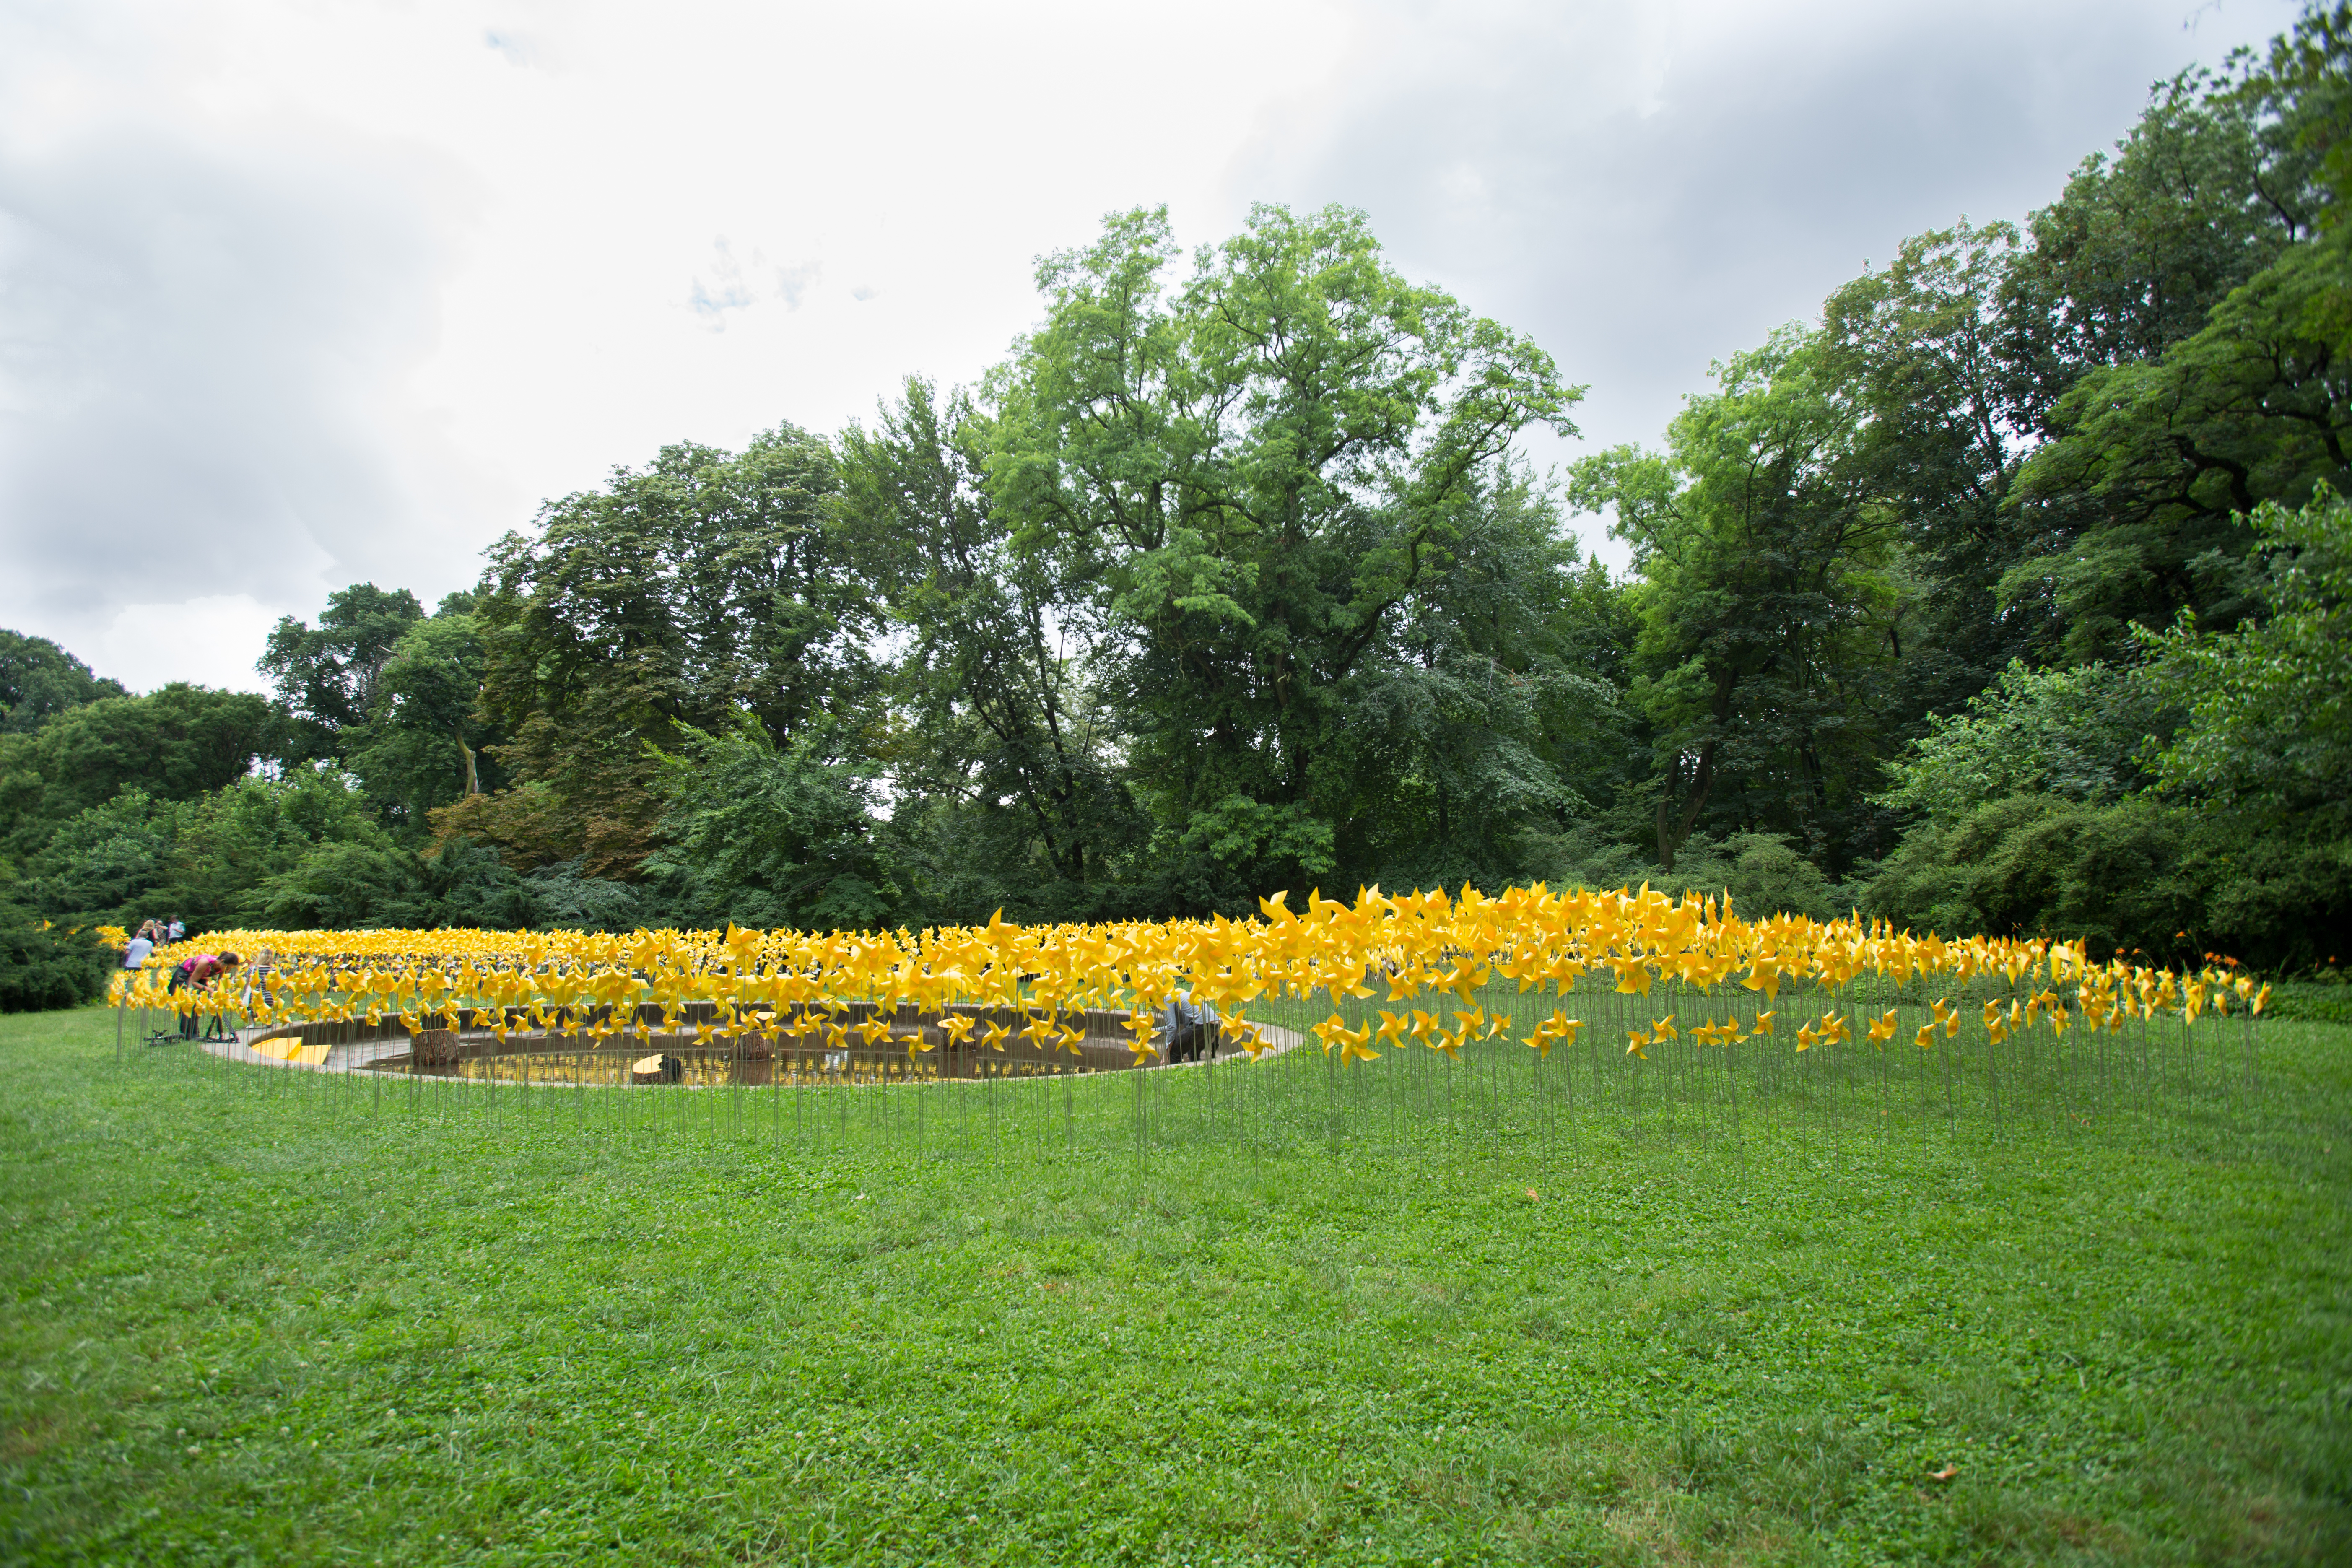 The Connective Project in Prospect Park in Brooklyn featured 7,000 sculpturally arranged pinwheels.